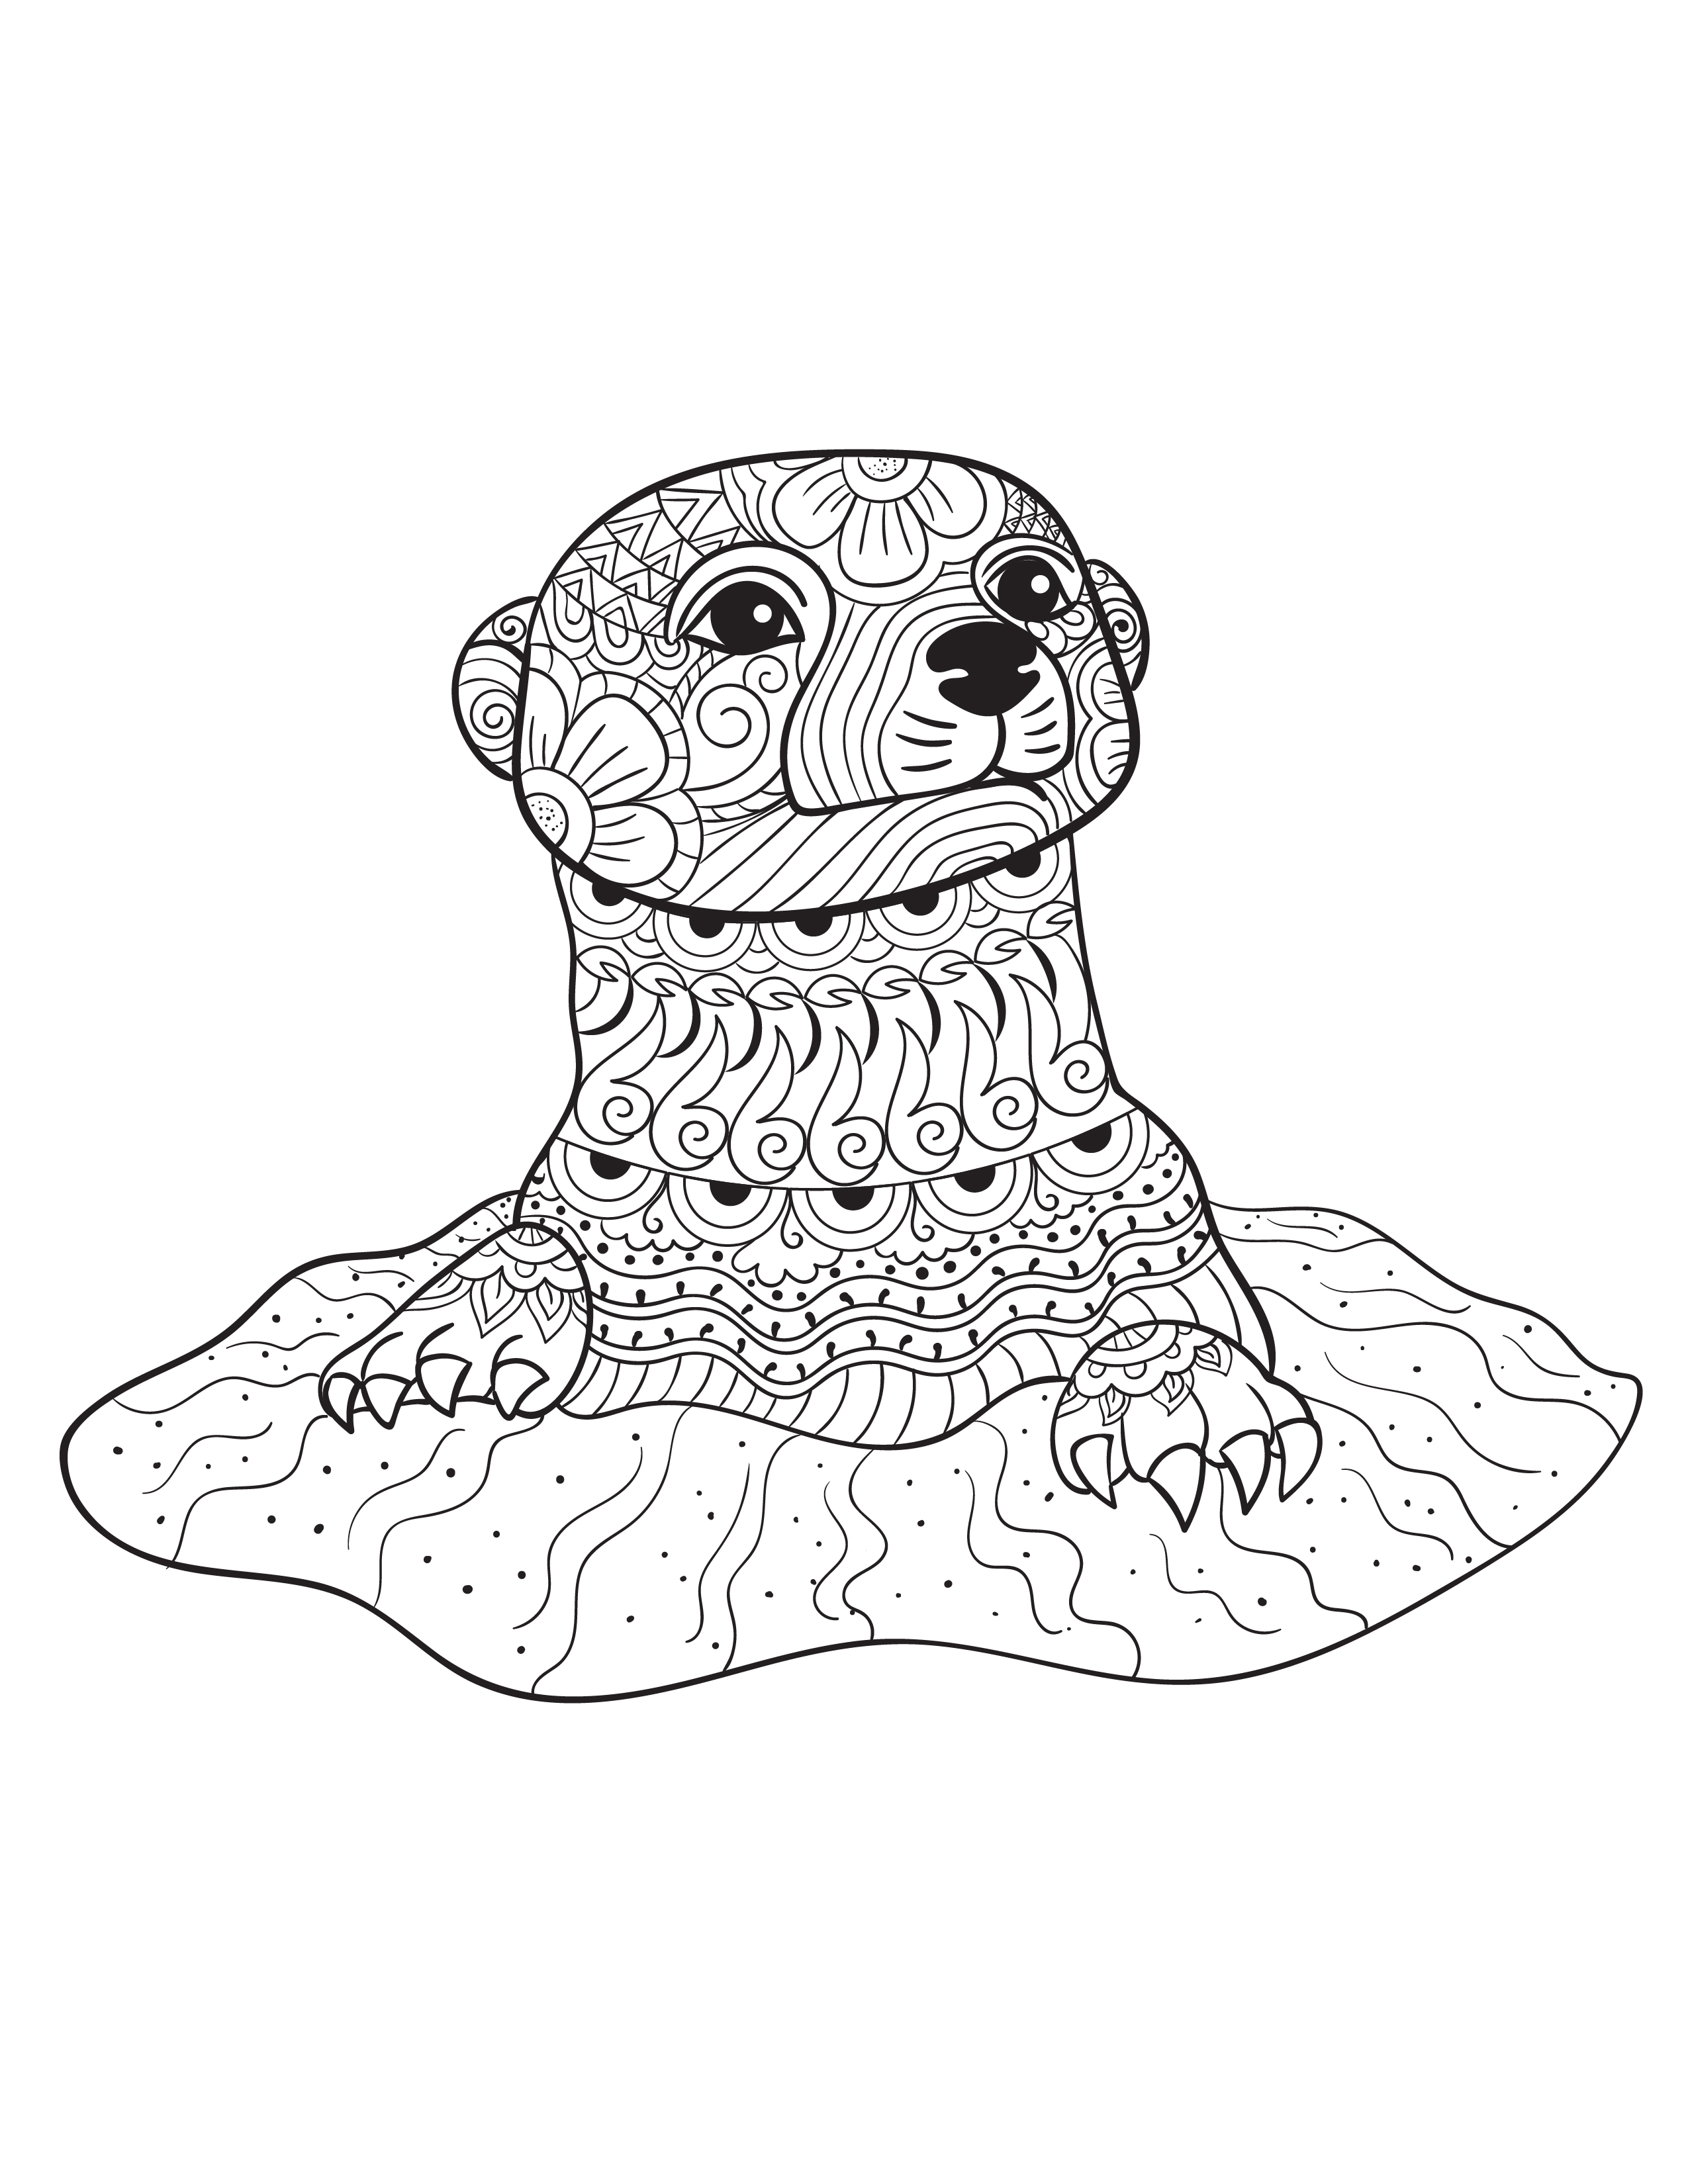 free-adult-coloring-pages-animals-at-getcolorings-free-printable-colorings-pages-to-print